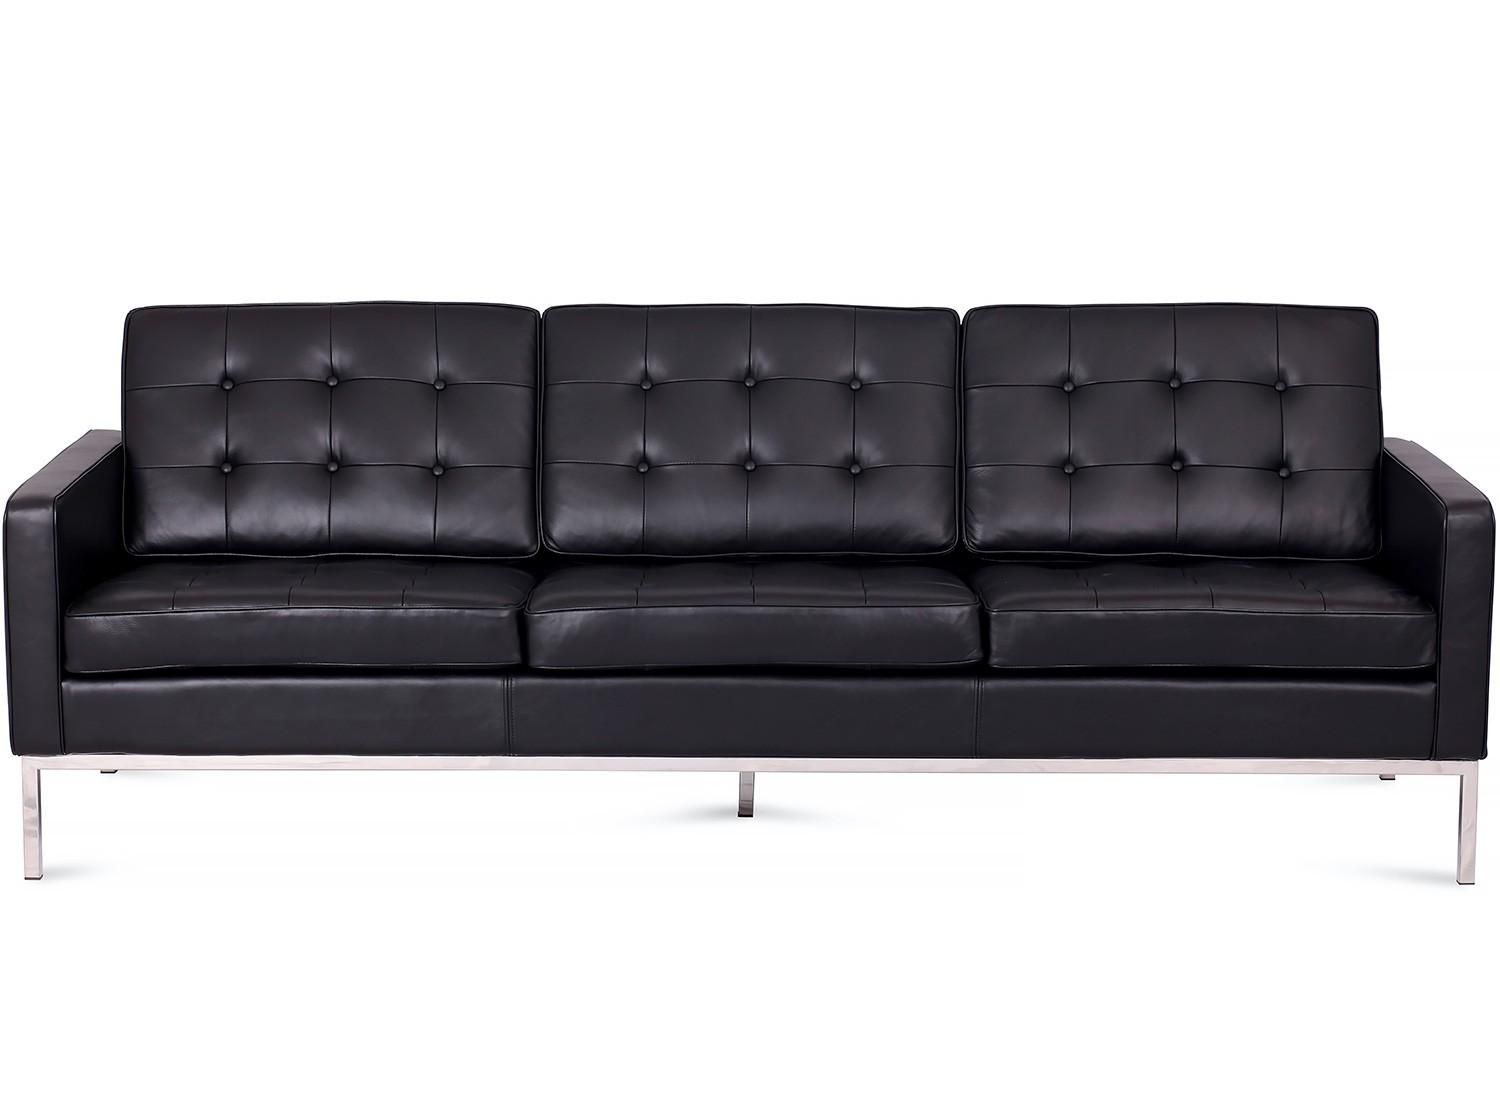 Sofas Center : Florencell Sofa Reproduction Weightflorence Chaise Regarding Florence Medium Sofas (View 13 of 20)